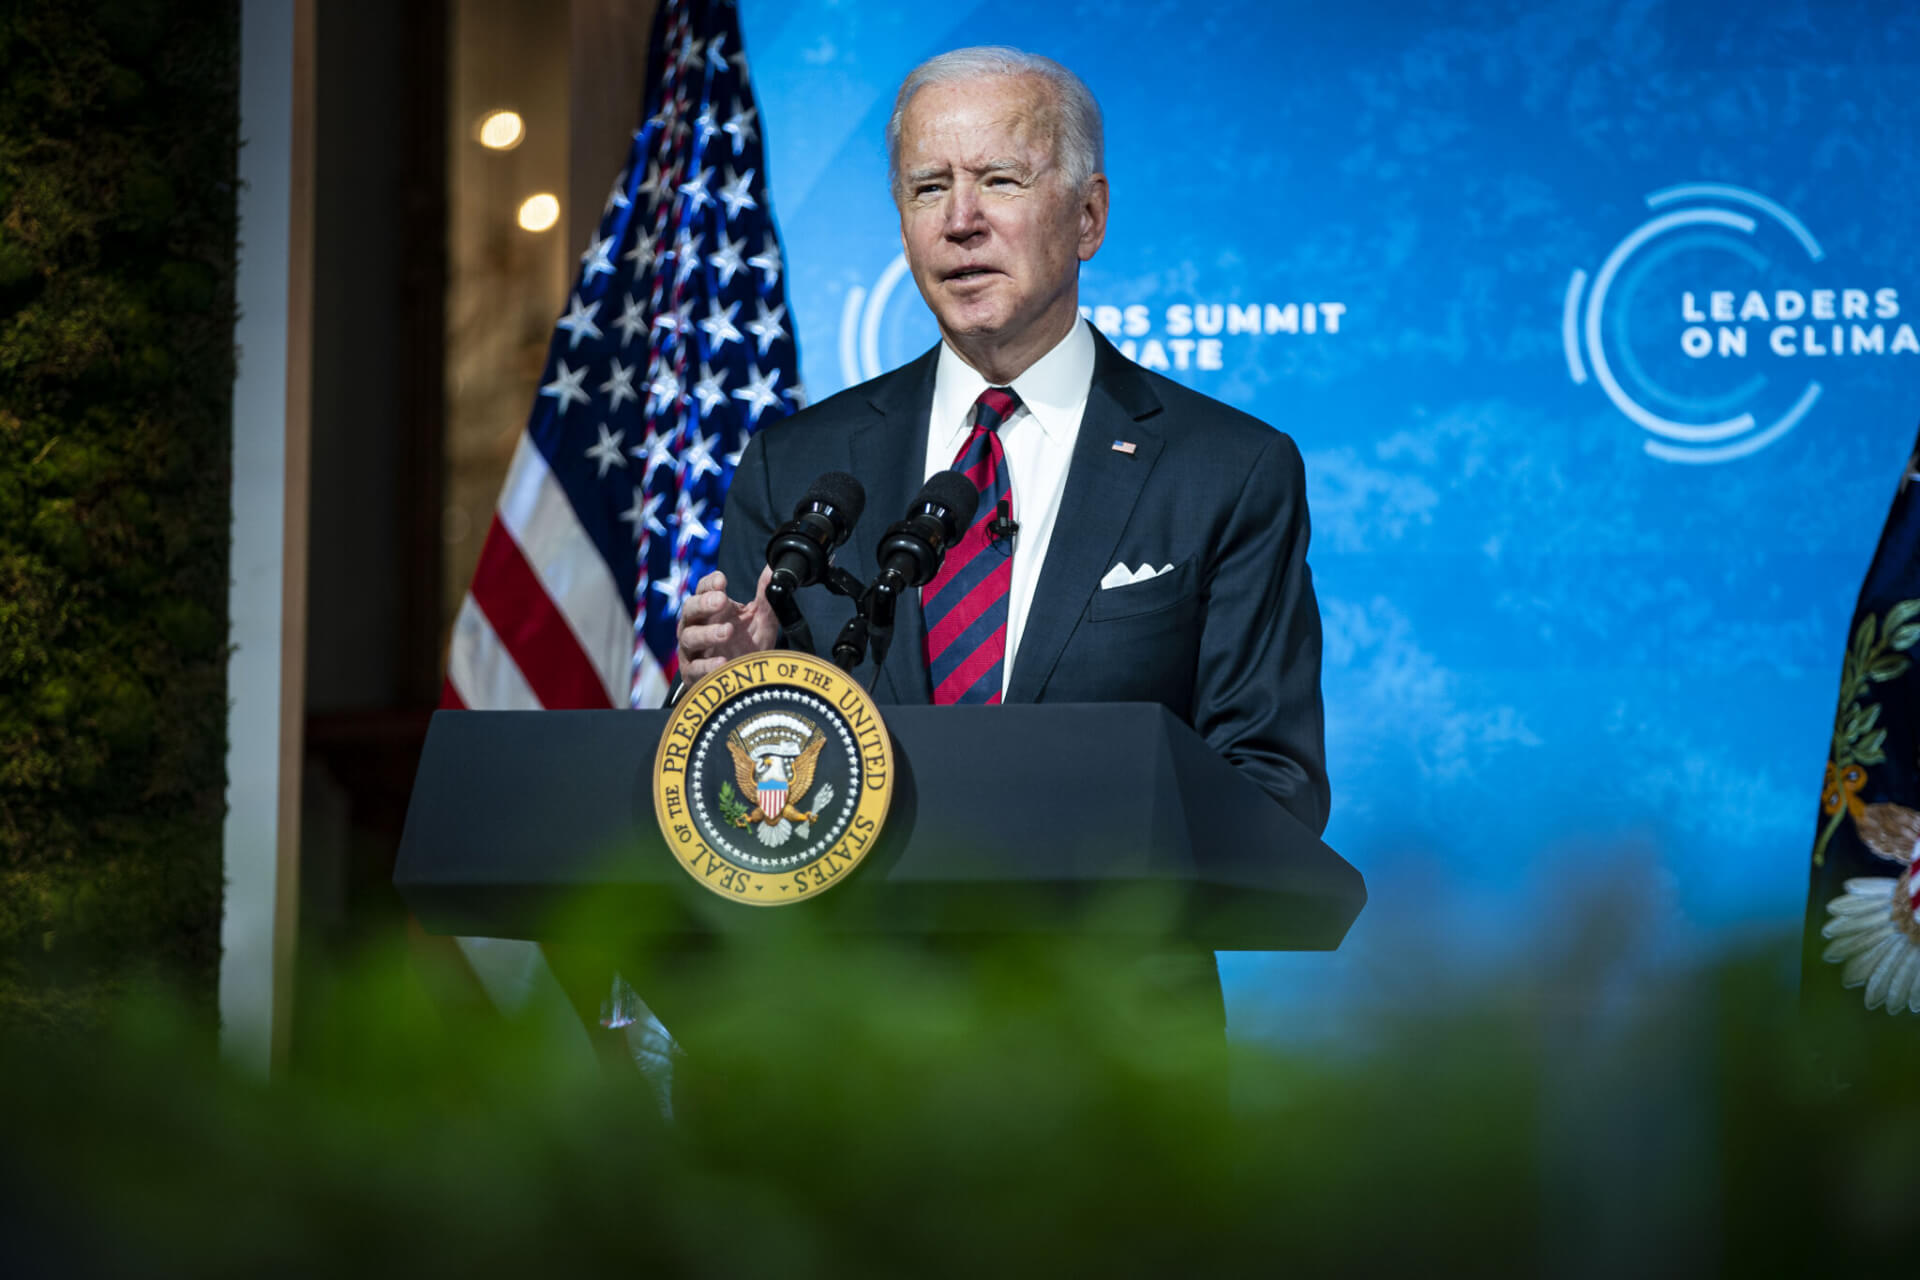 Biden Introduces First-Ever International Climate Finance Plan at Leaders Summit